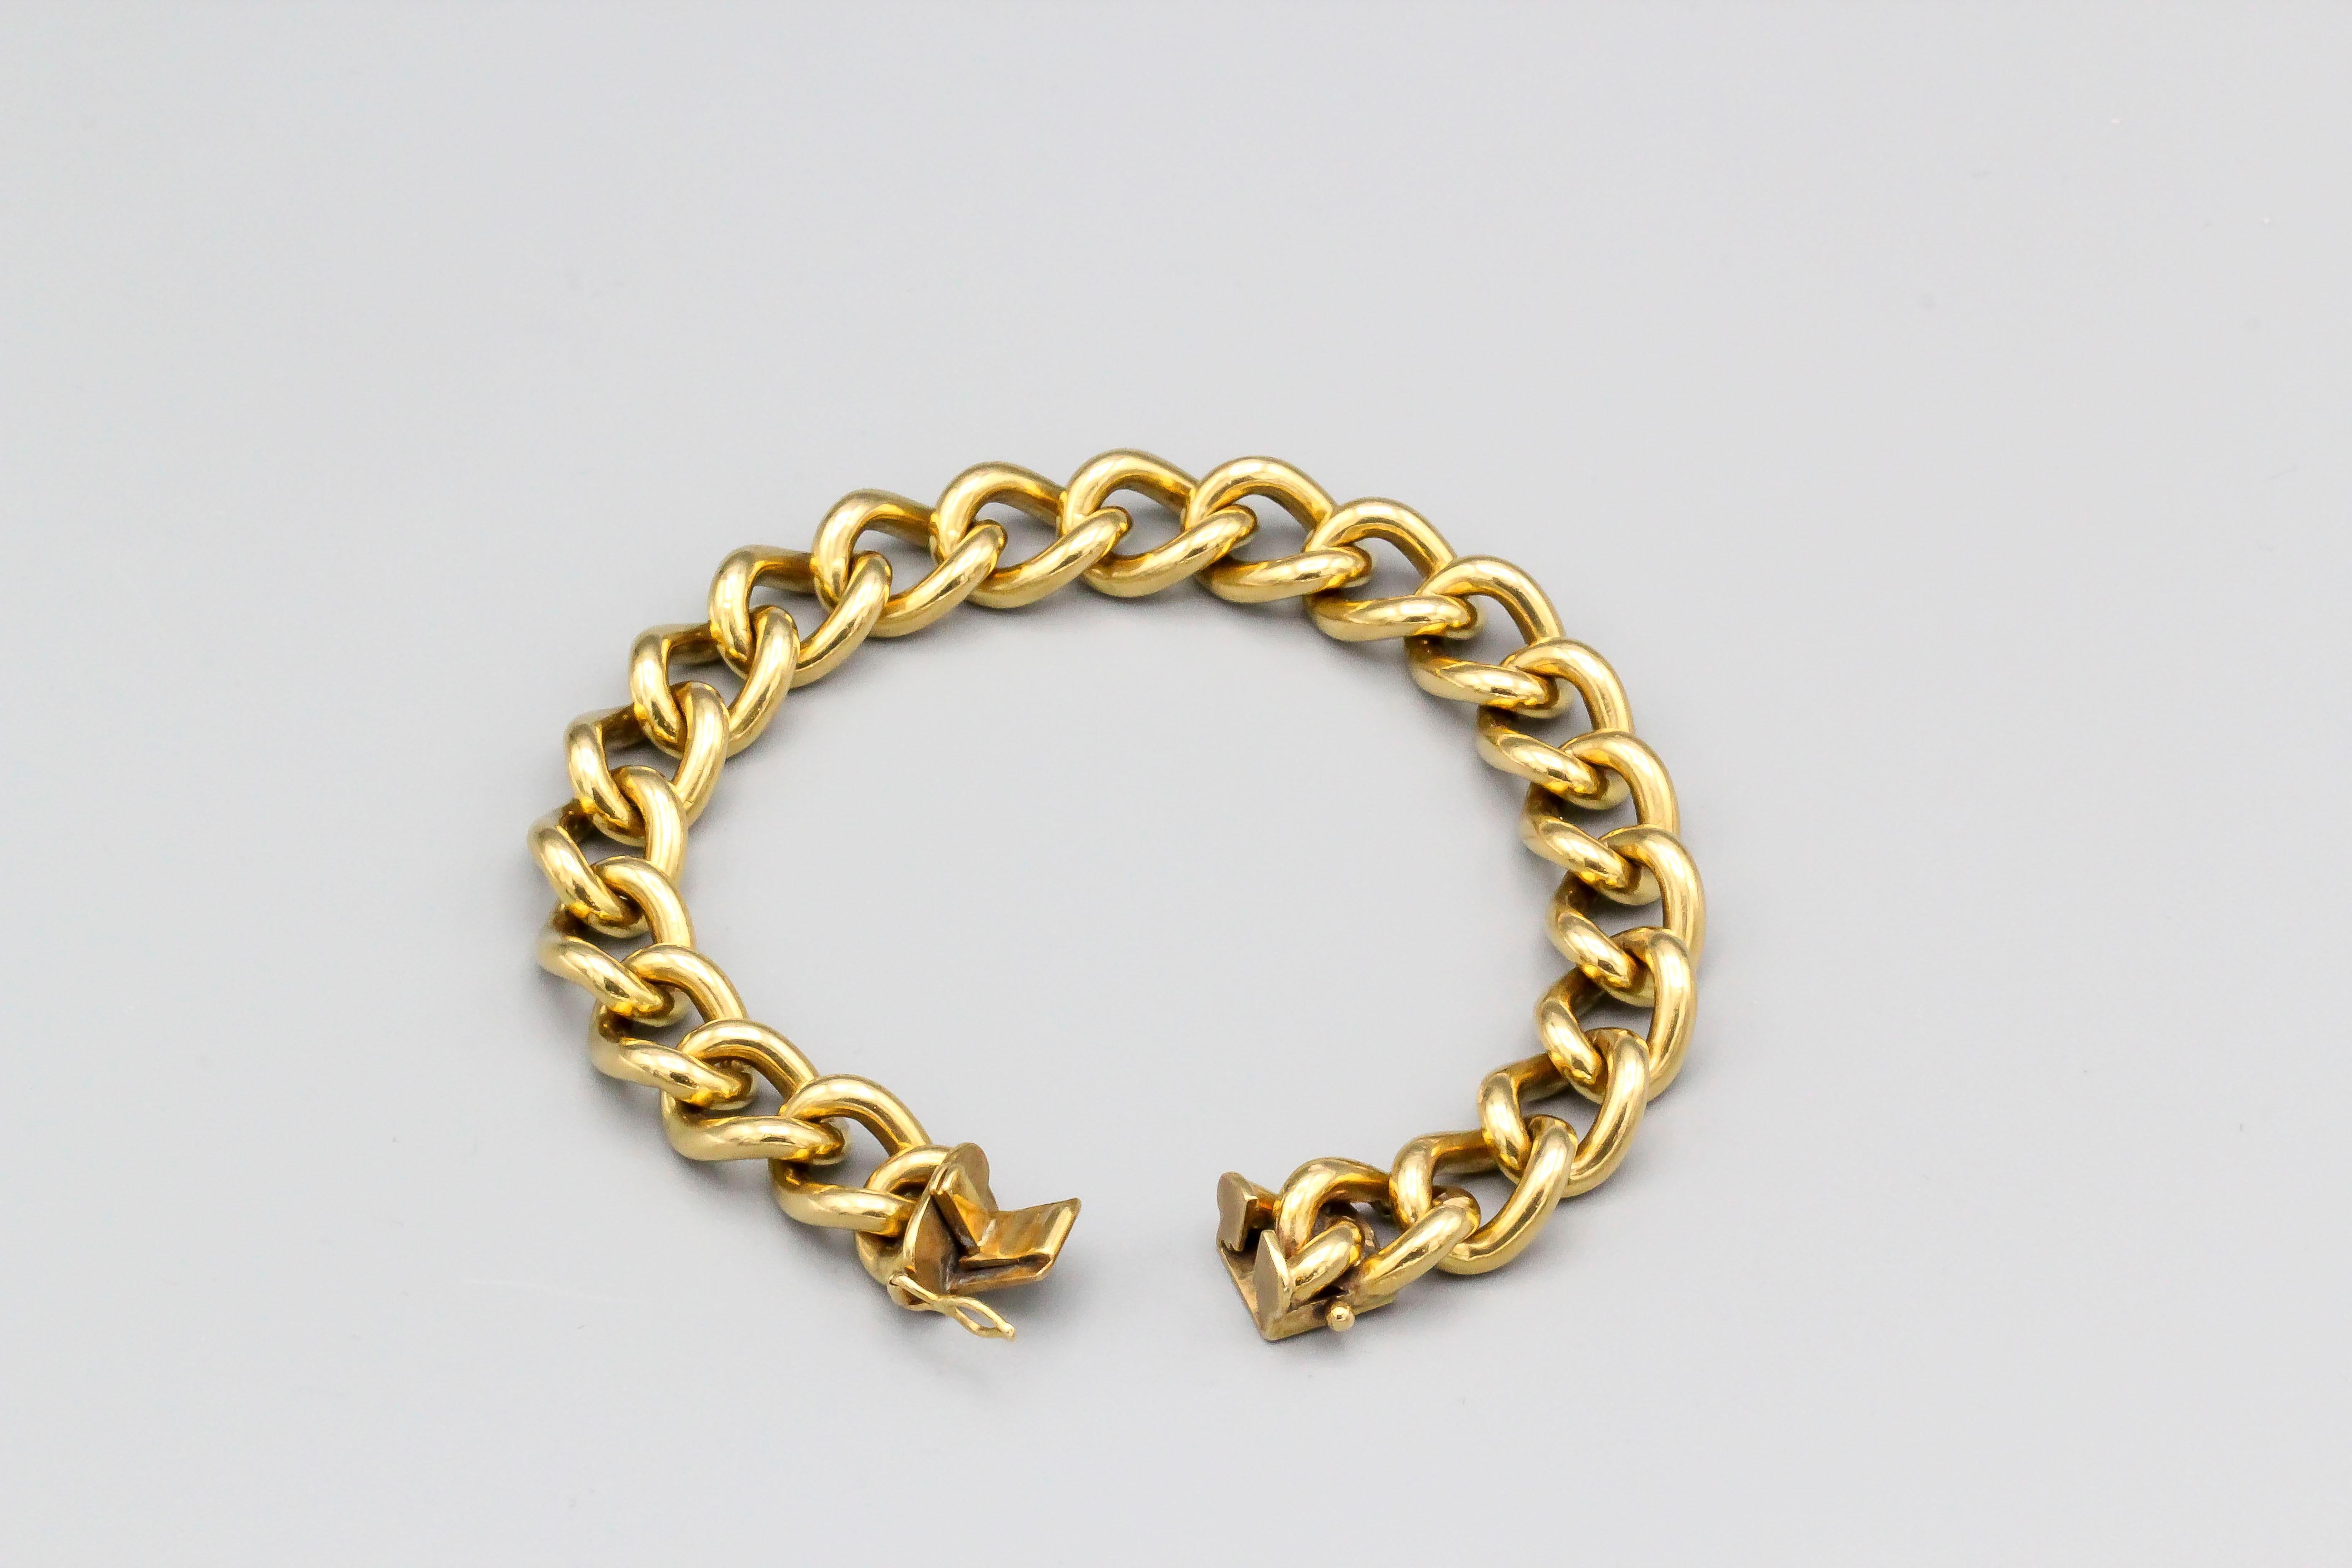 Interesting 18k gold link bracelet, of English origin circa 1960s.  It weighs a hefty 73.7 grams and measures over 7.5 inches long.

Hallmarks: maker's marks, 18ct